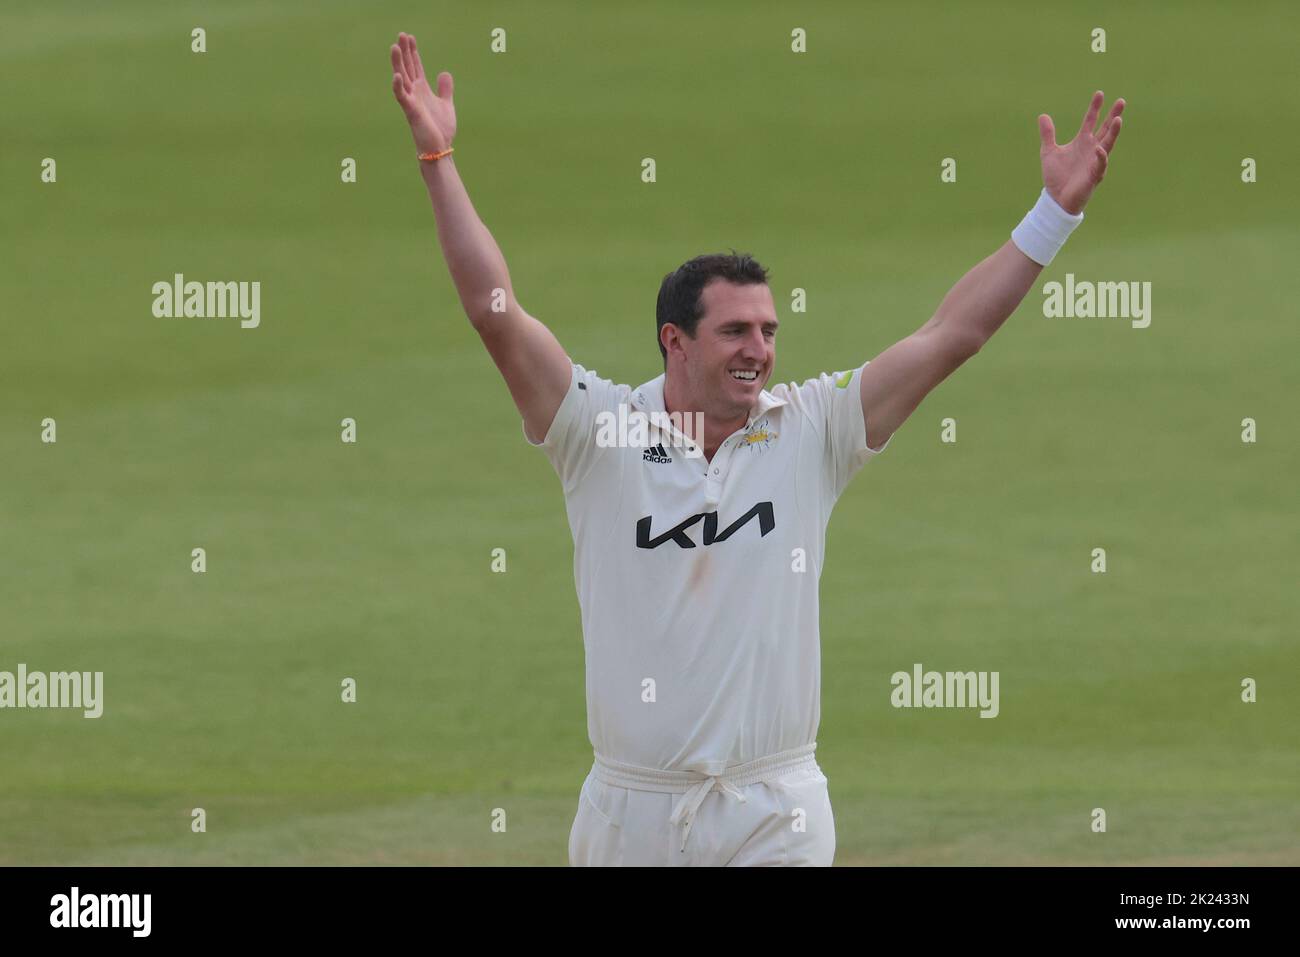 22 September, 2022. London, UK. Surrey’s Dan Worrall celebrates after getting the wicket of Jordan Thompson as Surrey take on Yorkshire in the County Championship at the Kia Oval, day three David Rowe/Alamy Live News Stock Photo